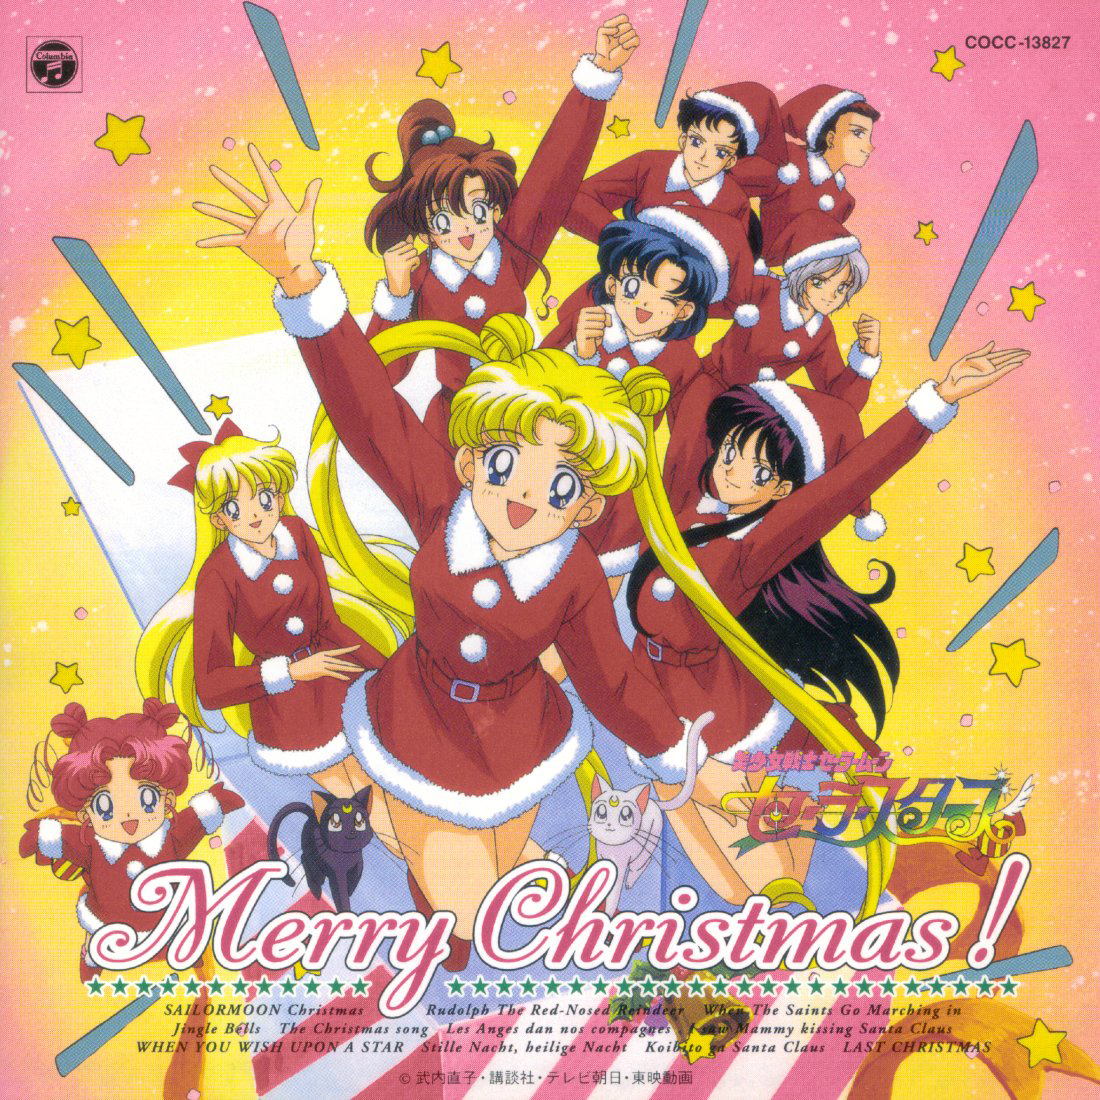 Sailor Moon Christmas image featuring Sailor Moon characters in Santa outfits on the cover of an Xmas music CD.